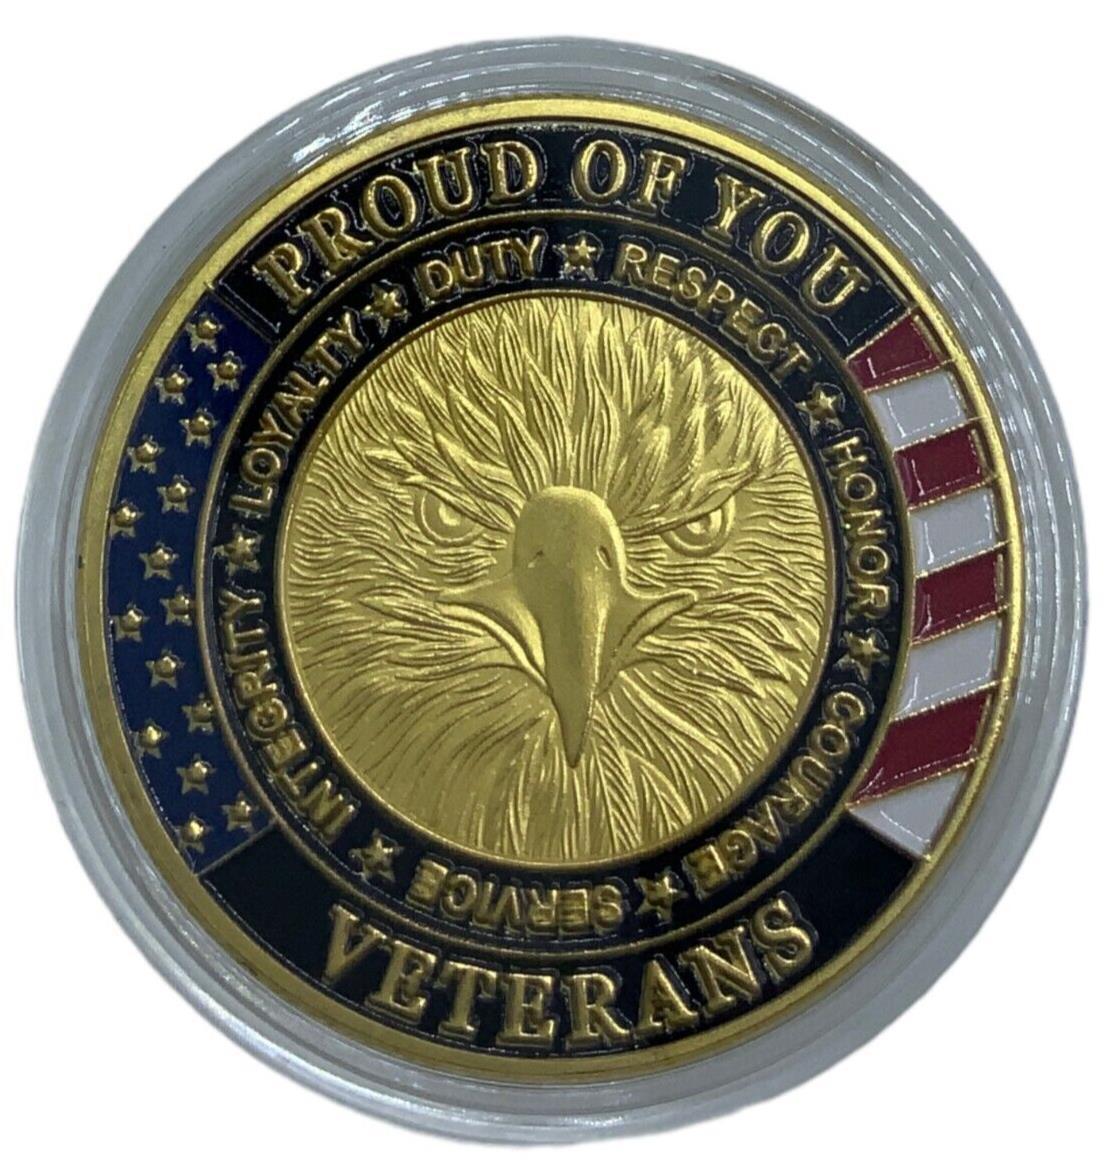 Proud of You Veterans Thank You for Your Service Challenge Coin